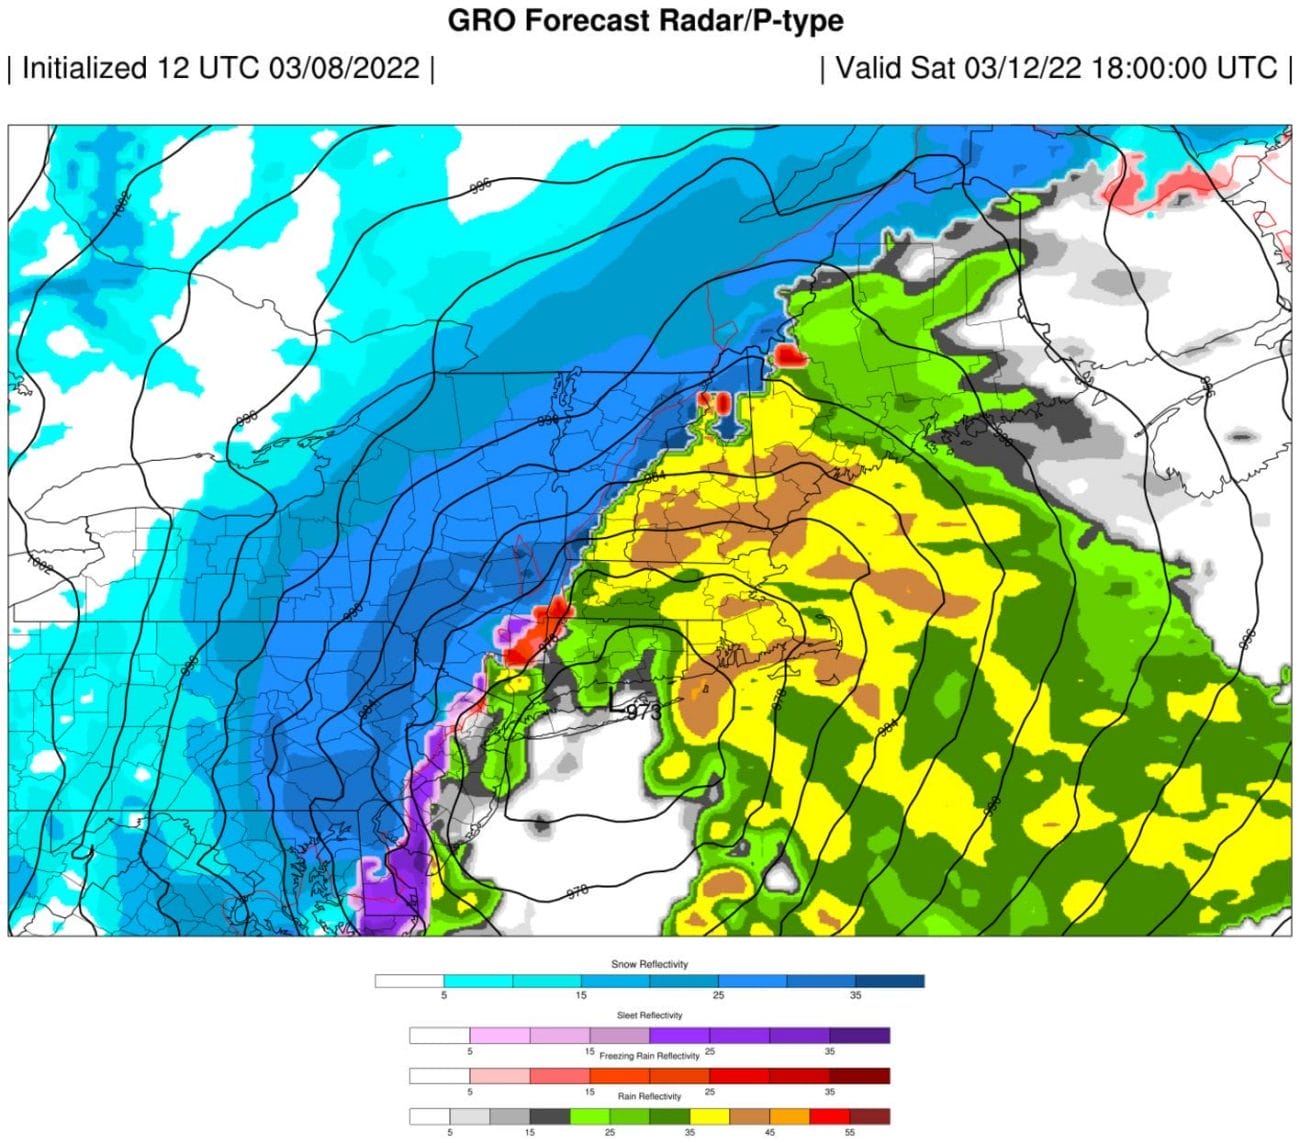 GRO Model forecast for rain in North Eastern United States